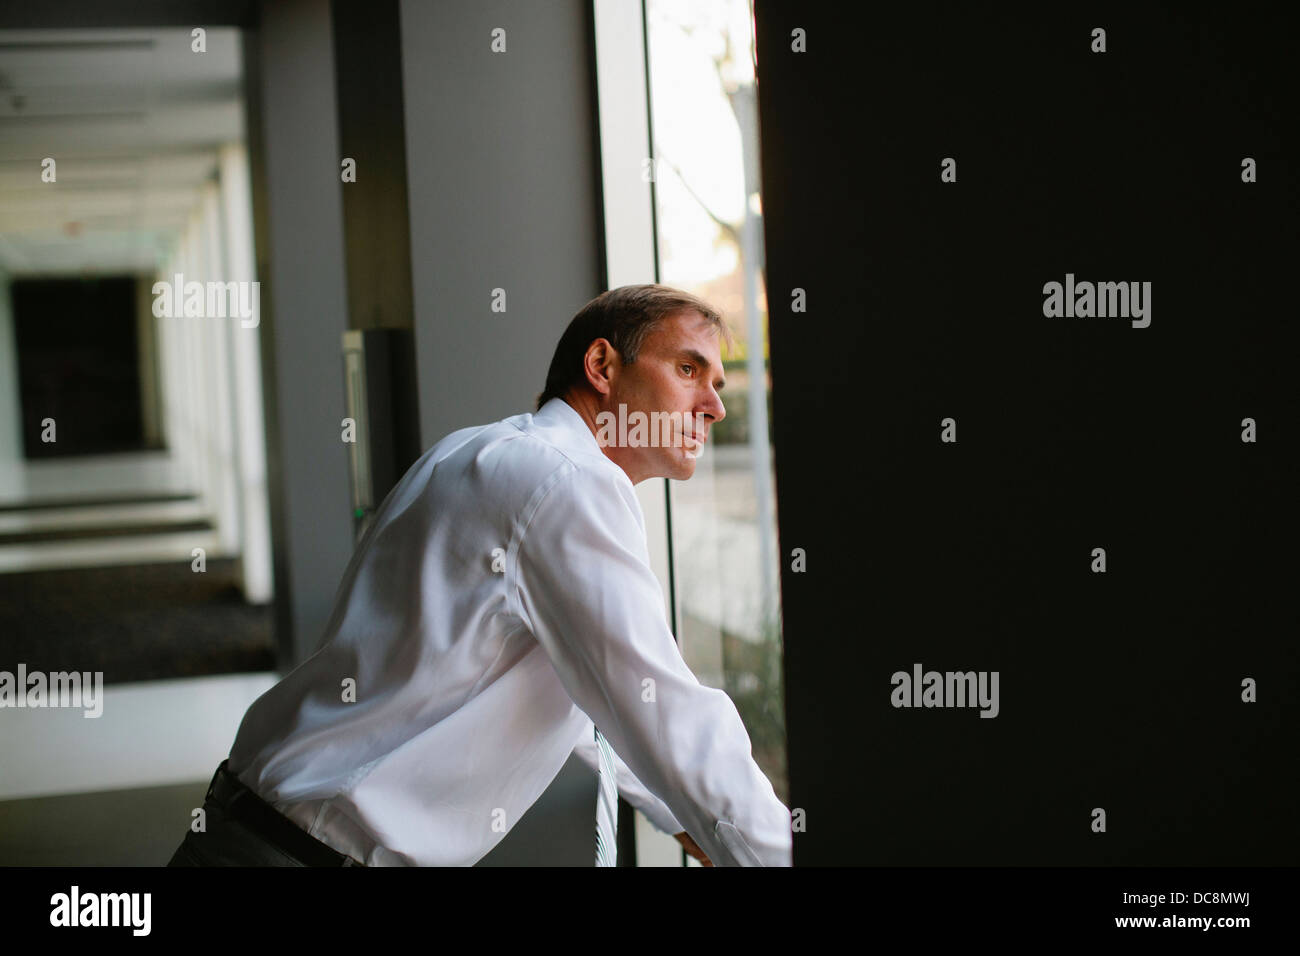 Businessman glances through the window in his office. Stock Photo